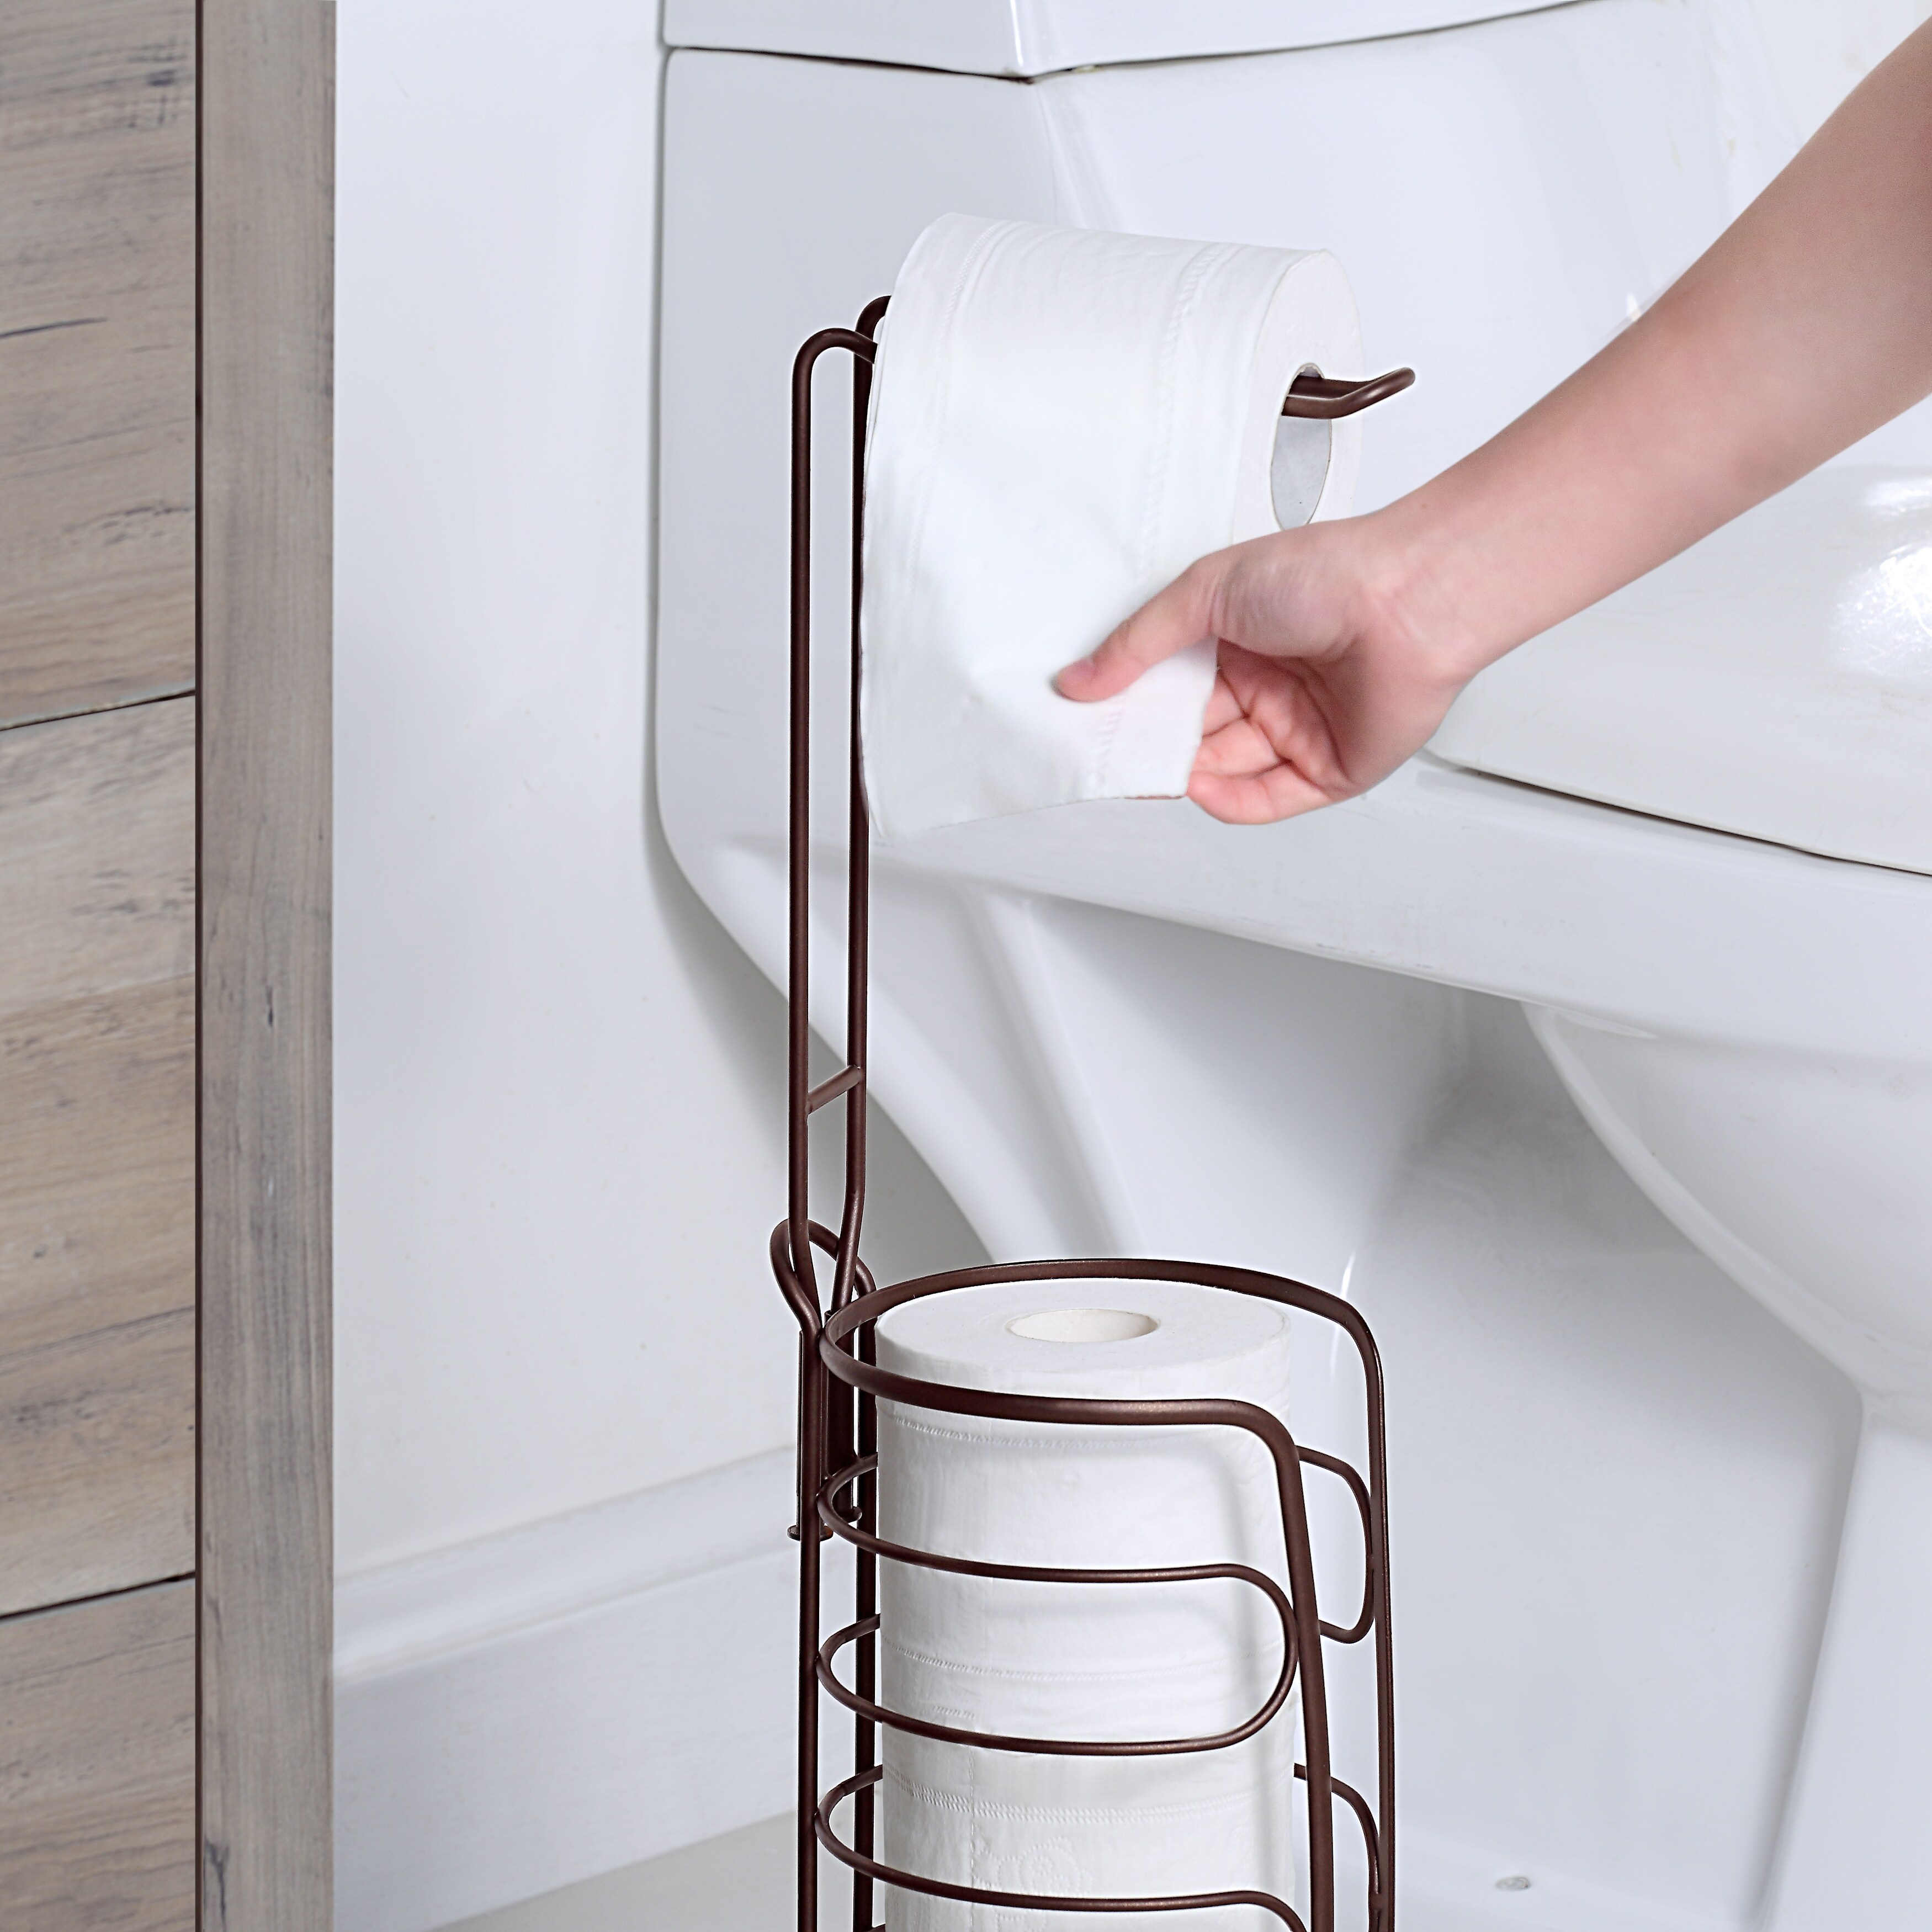 https://ak1.ostkcdn.com/images/products/is/images/direct/e00b2e33e21df08436ea4f8e259c9800876b6d40/SunnyPoint-Freestanding-3-roll-Storage-Toilet-Paper-Holder.jpg